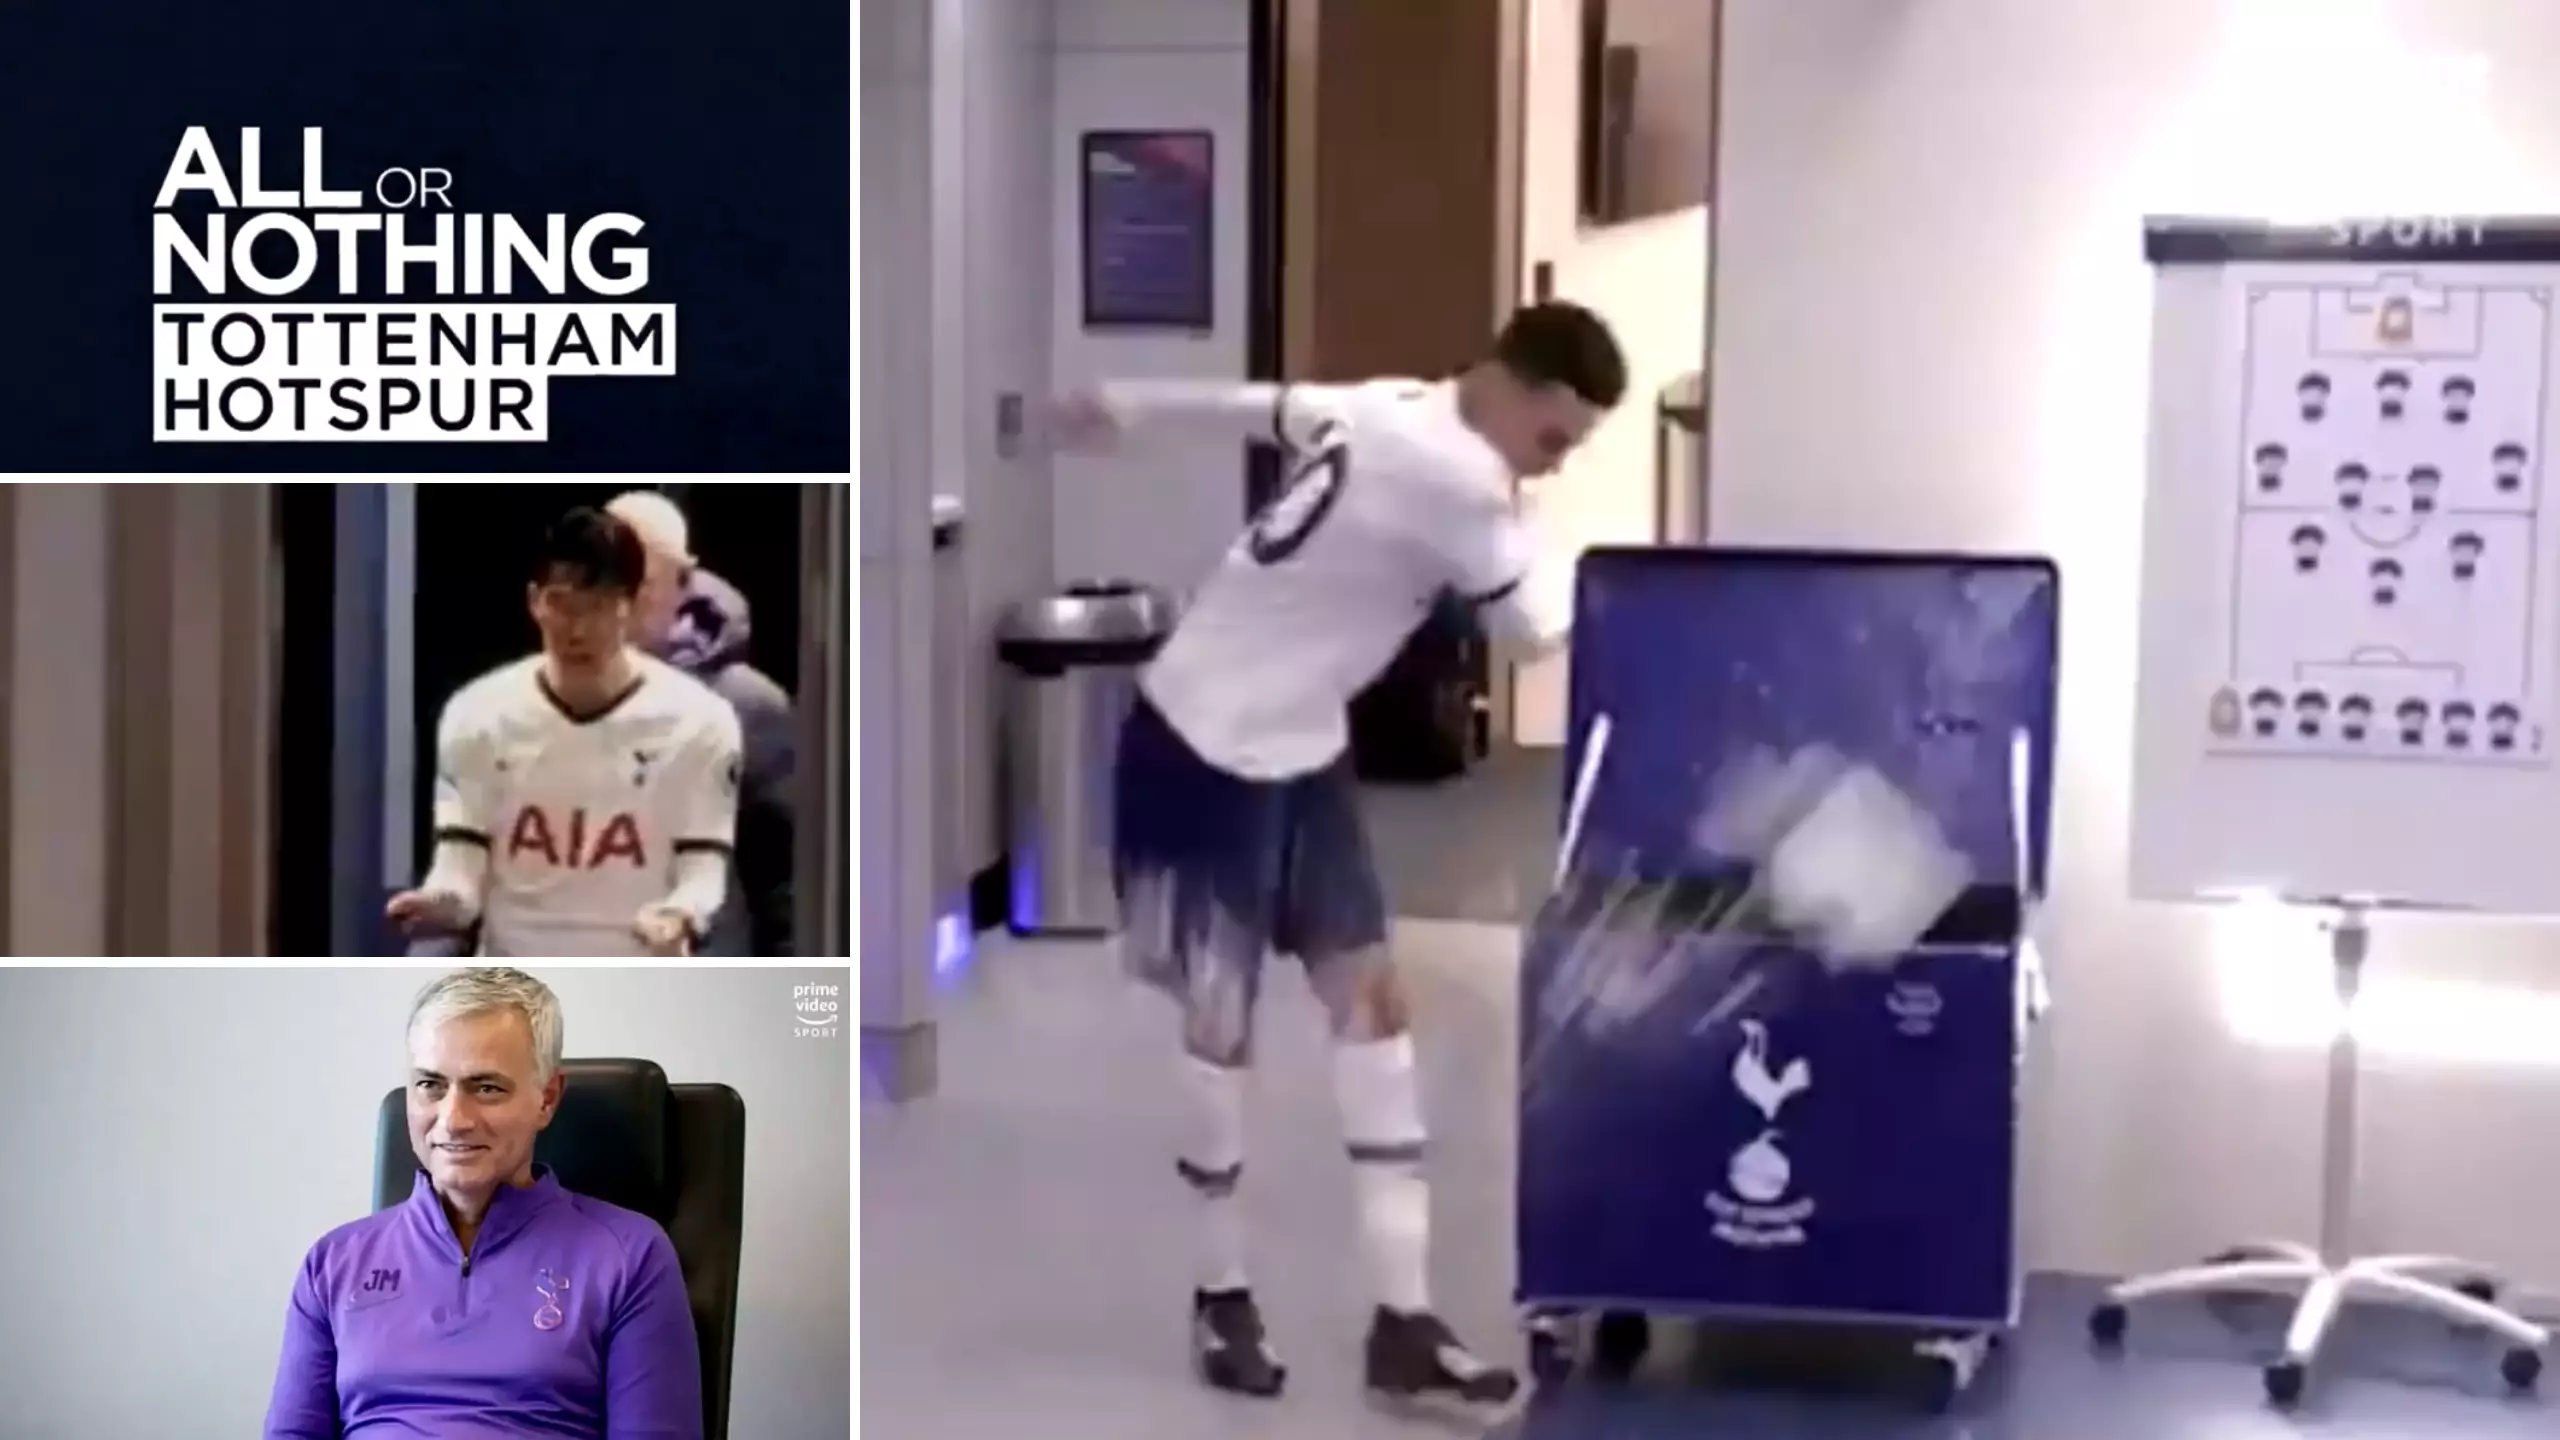 Tottenham's 'All Or Nothing' Documentary To Release On August 31 - The Newest Trailer Is Box Office Entertainment 